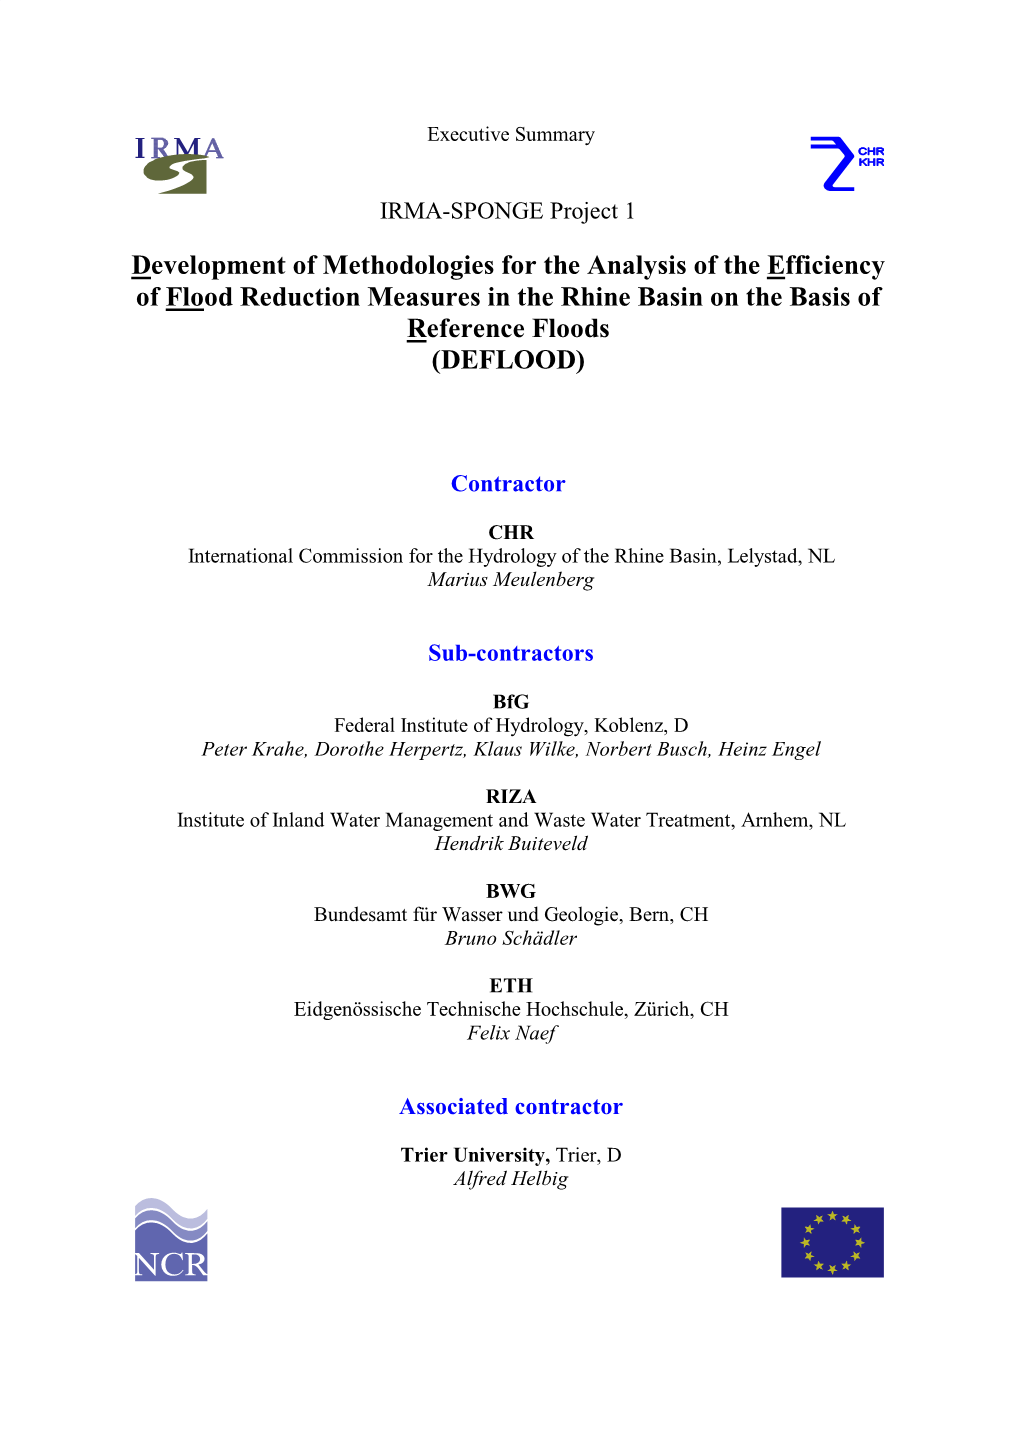 Development of Methodologies for the Analysis of the Efficiency of Flood Reduction Measures in the Rhine Basin on the Basis of Reference Floods (DEFLOOD)